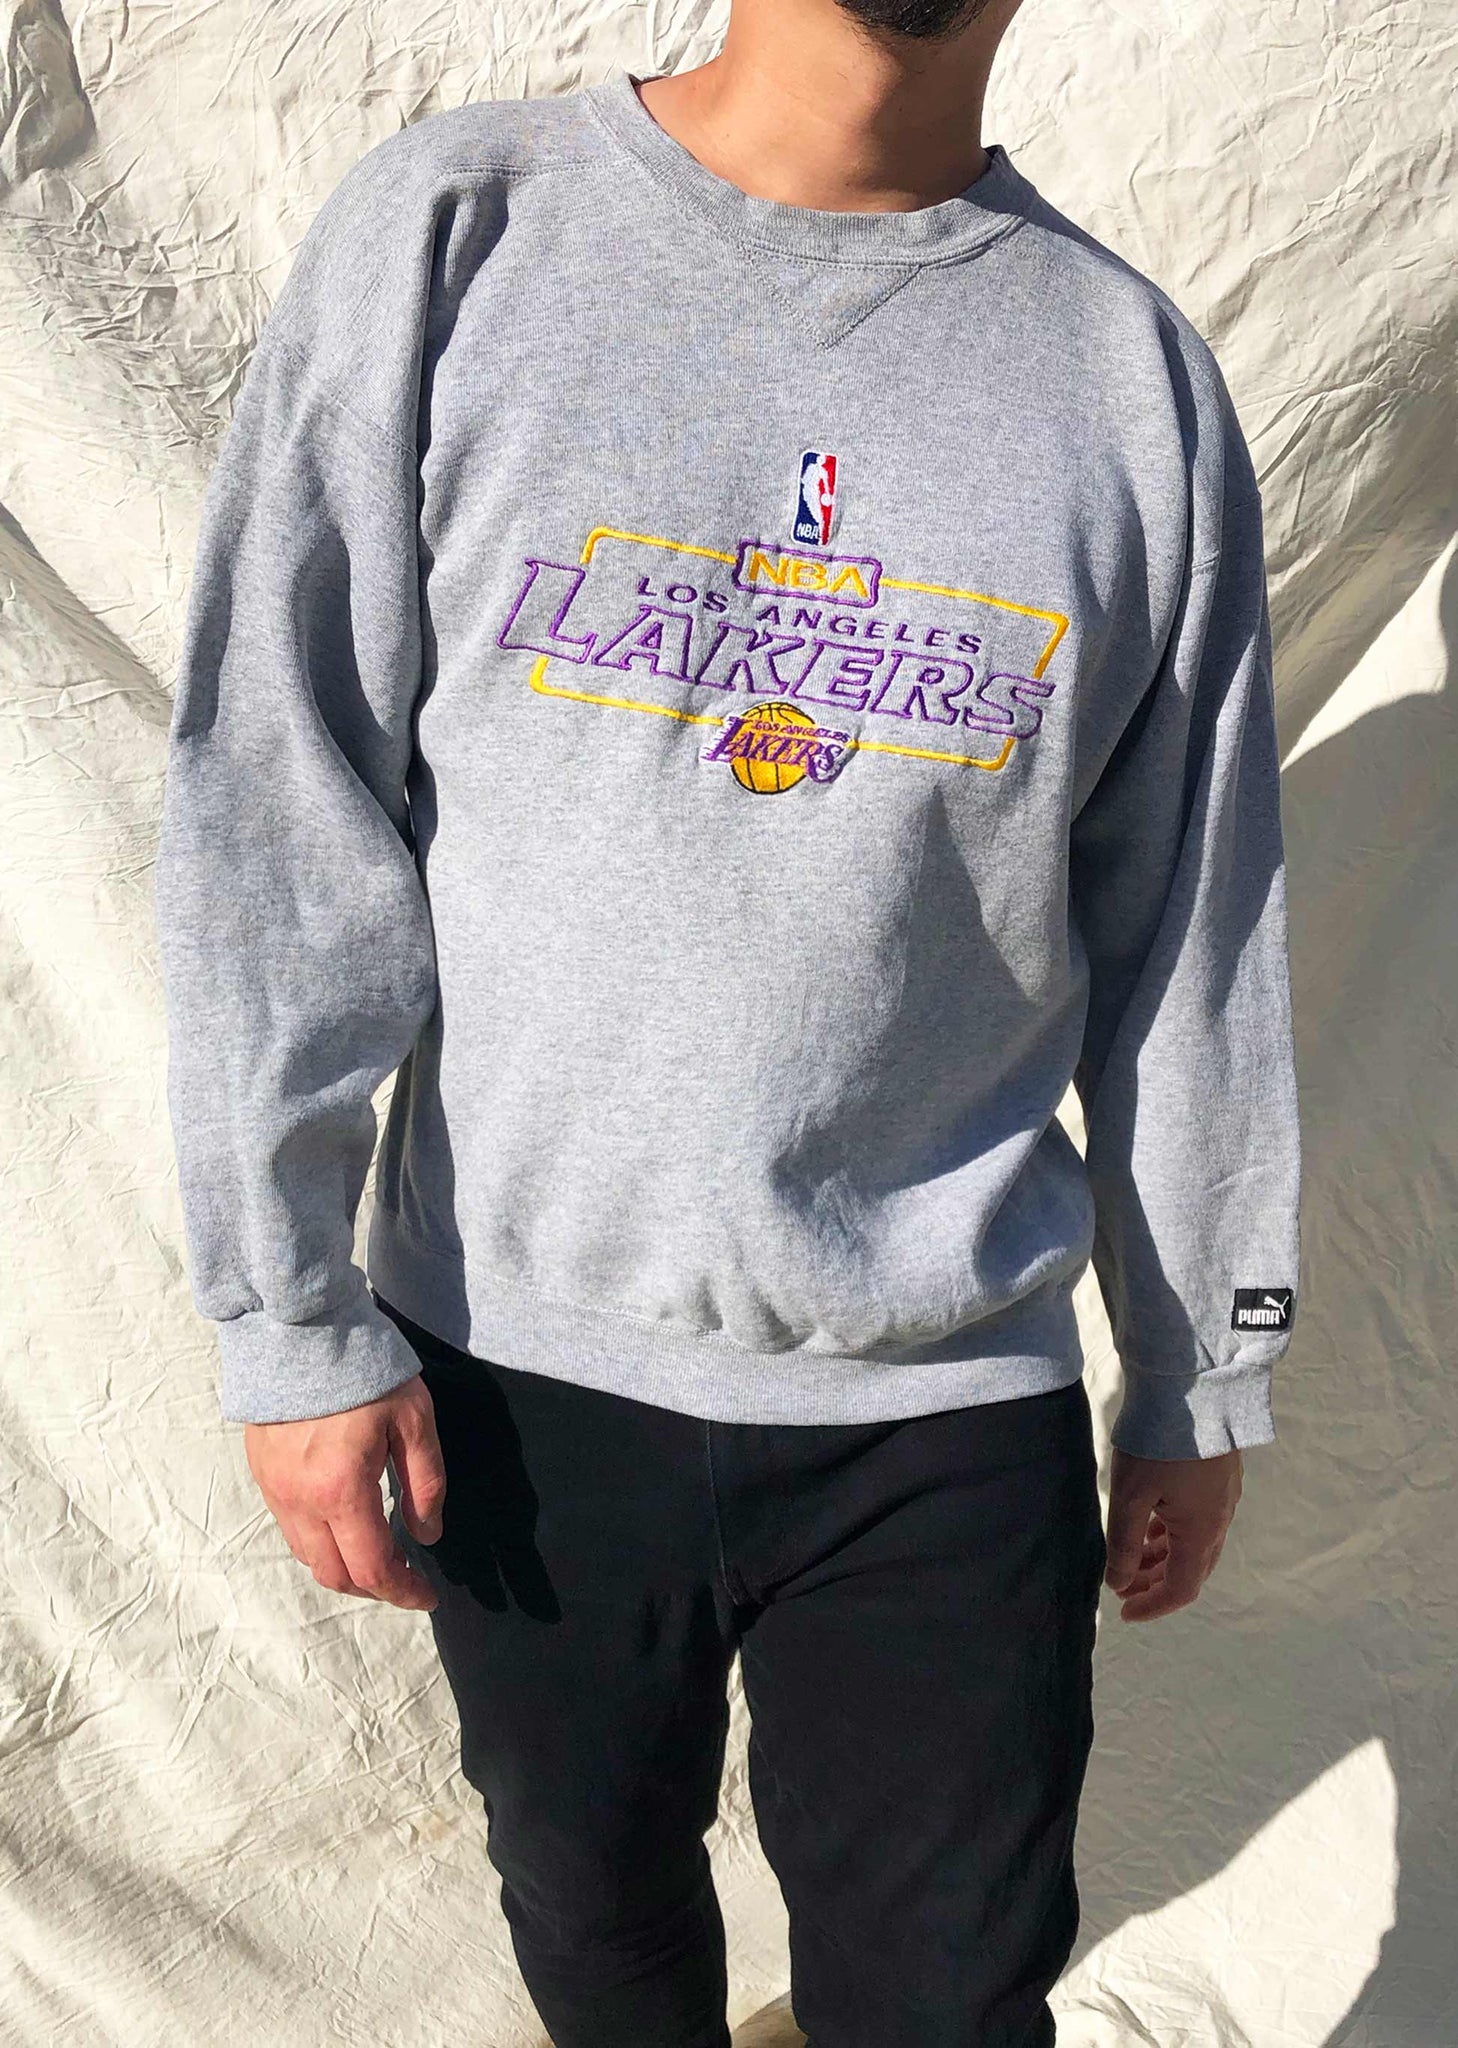 Pro Standard L.A Lakers Hoodie & Sweatpants Available in store Now!!!